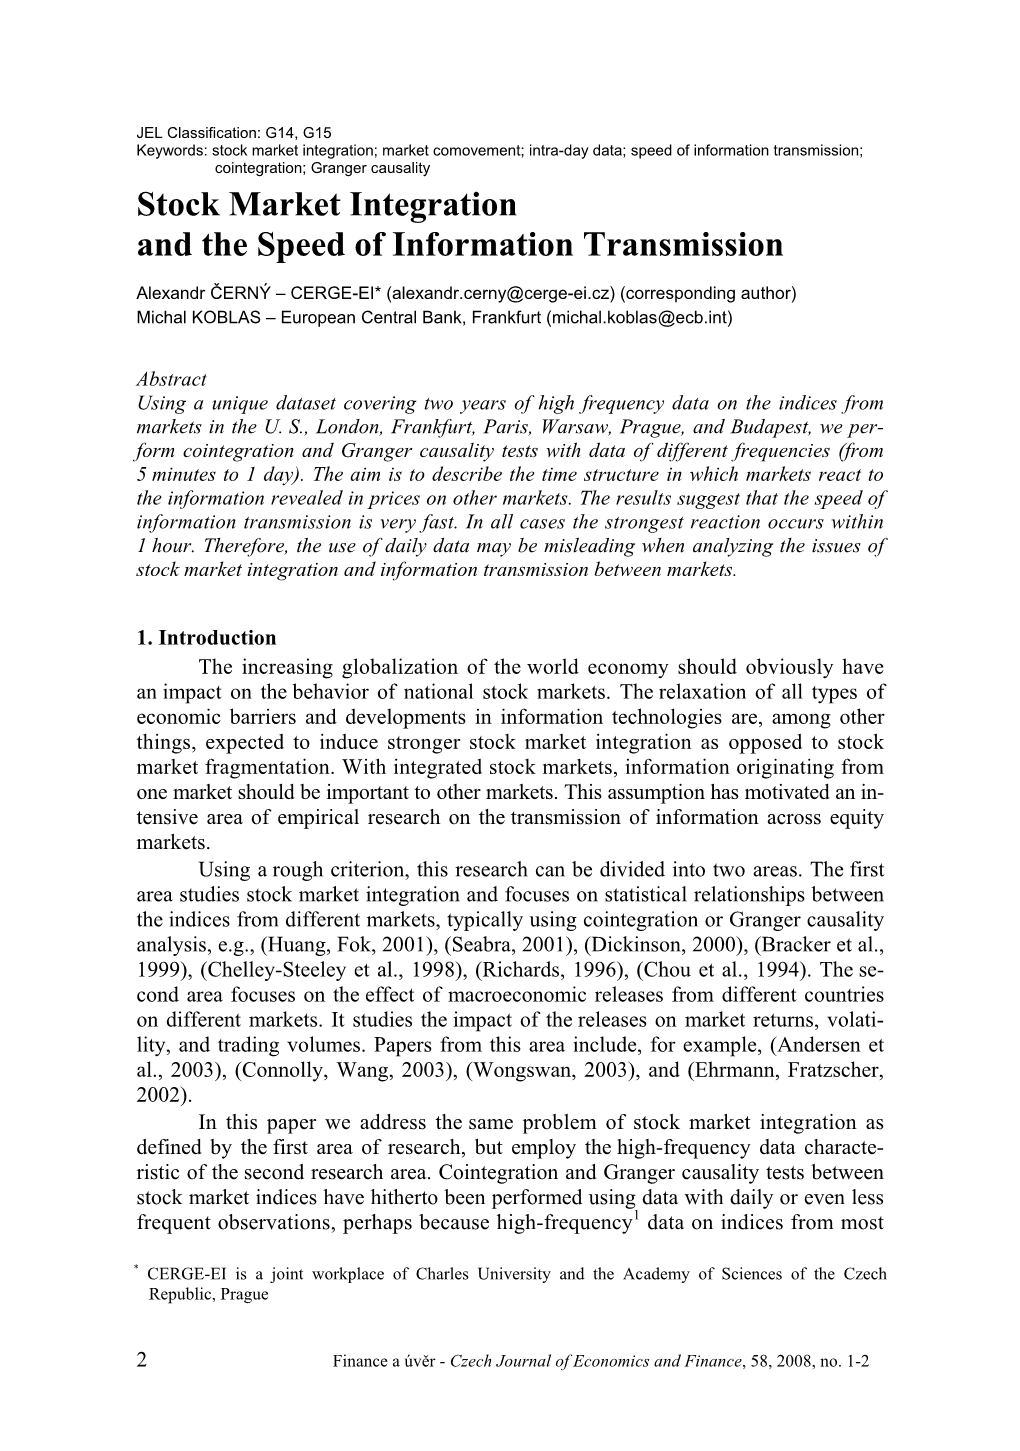 Stock Market Integration and the Speed of Information Transmission